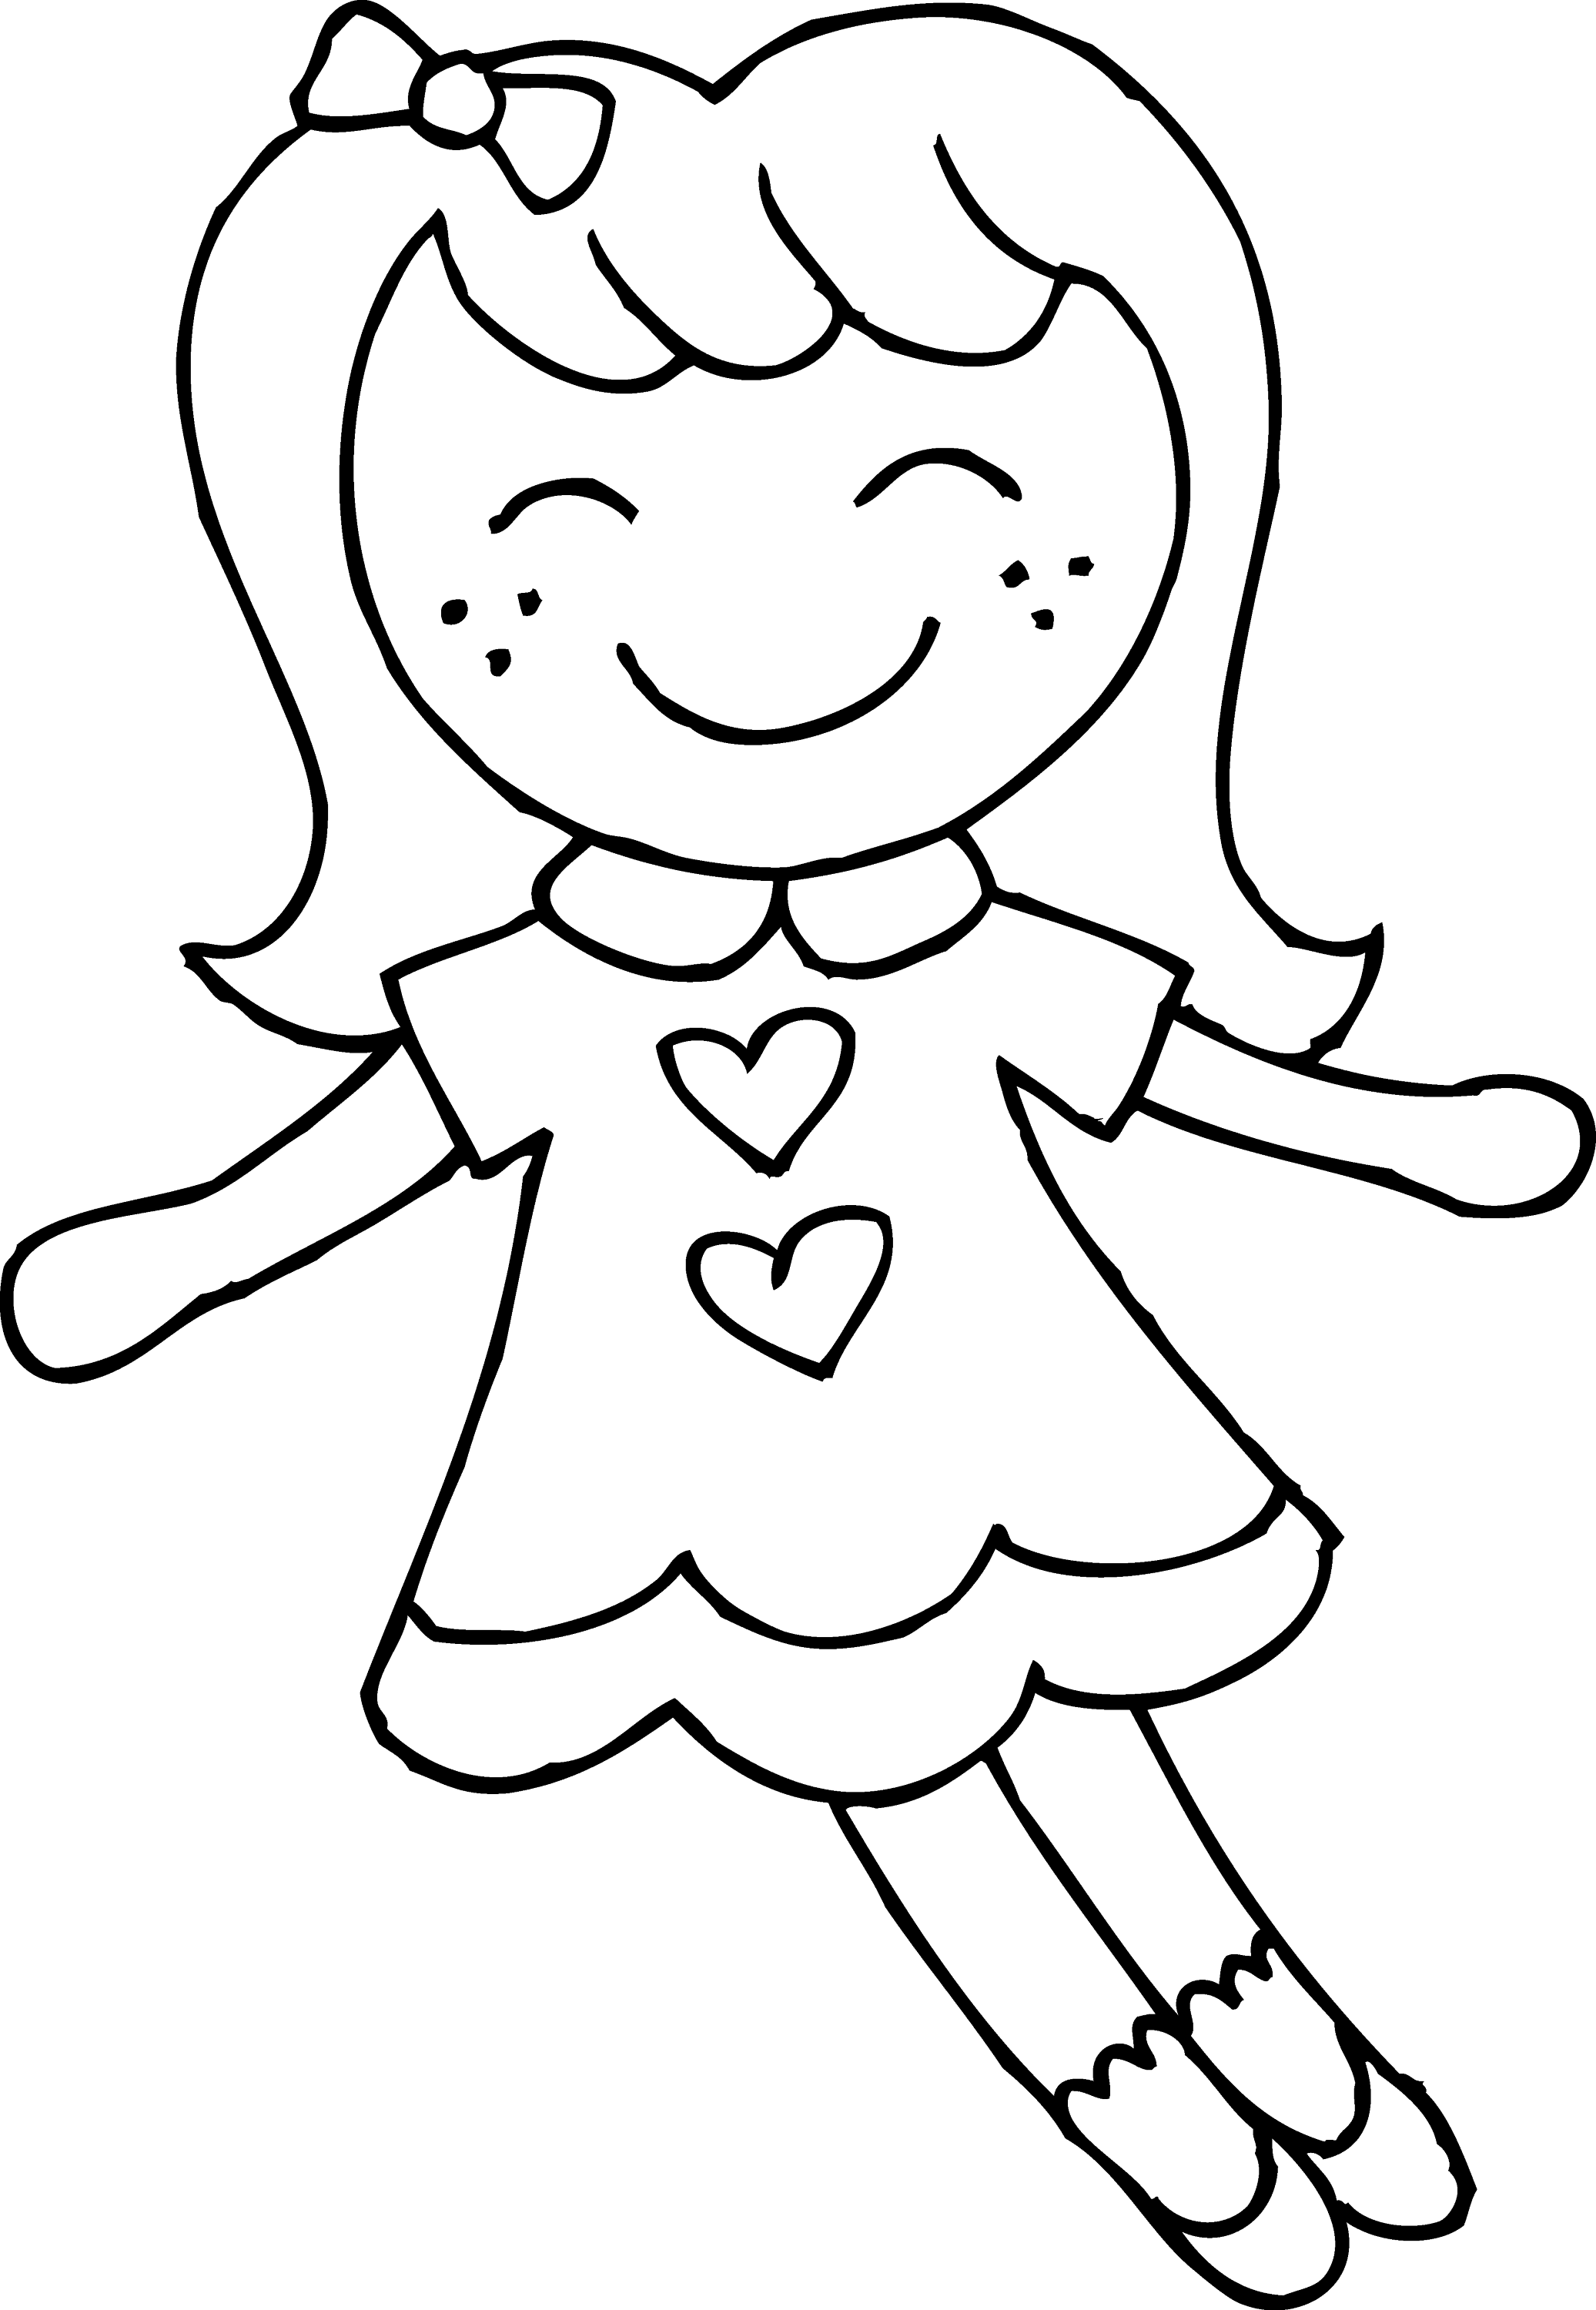 clipart of a doll - photo #29